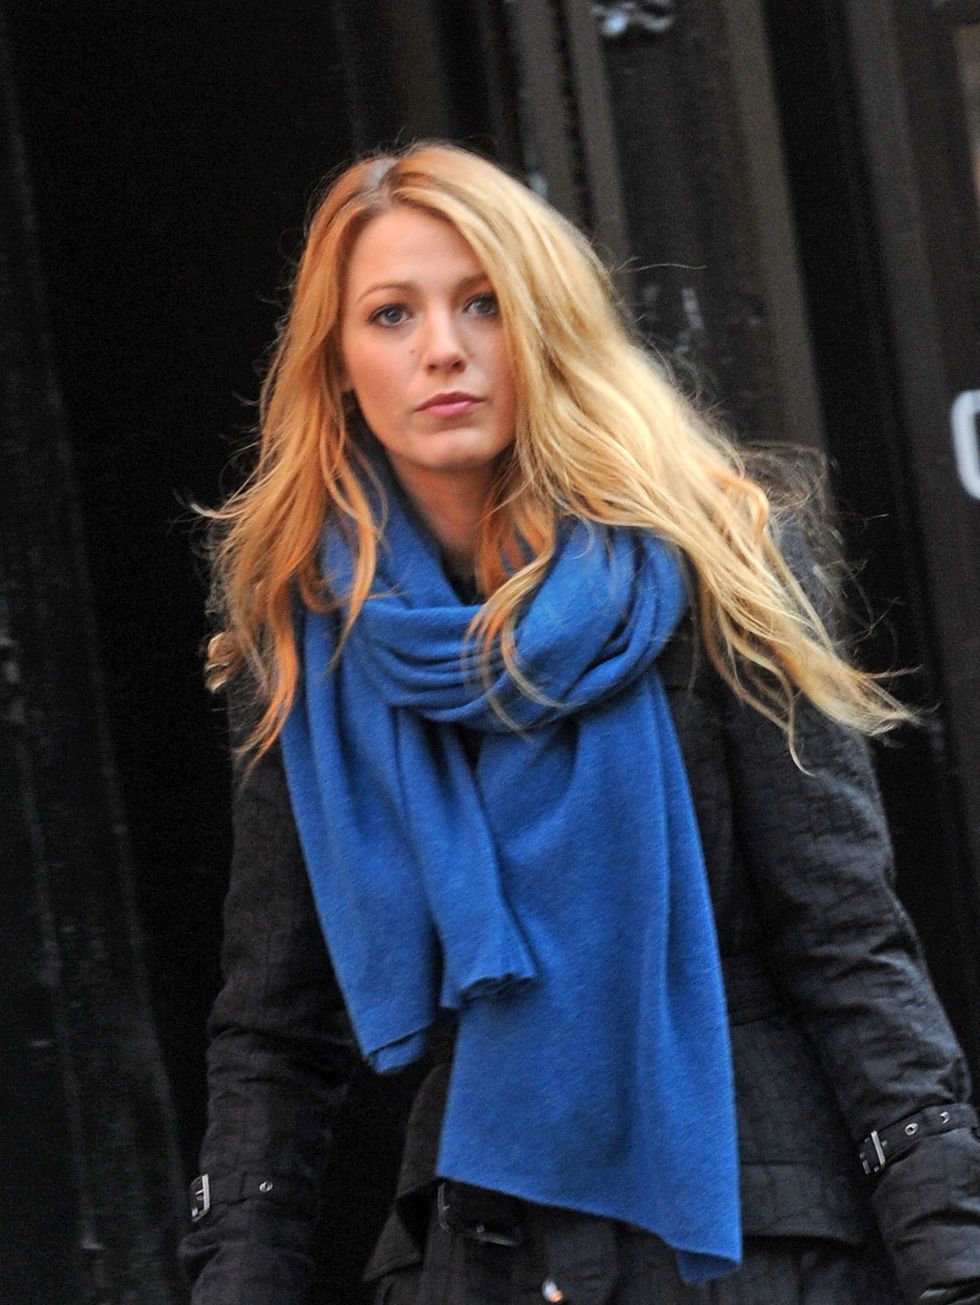 NEW YORK, NY - DECEMBER 14:  Blake Lively filming on location for "Gossip Girl" on December 14, 2011 in New York City.  (Photo by Bobby Bank/WireImage)